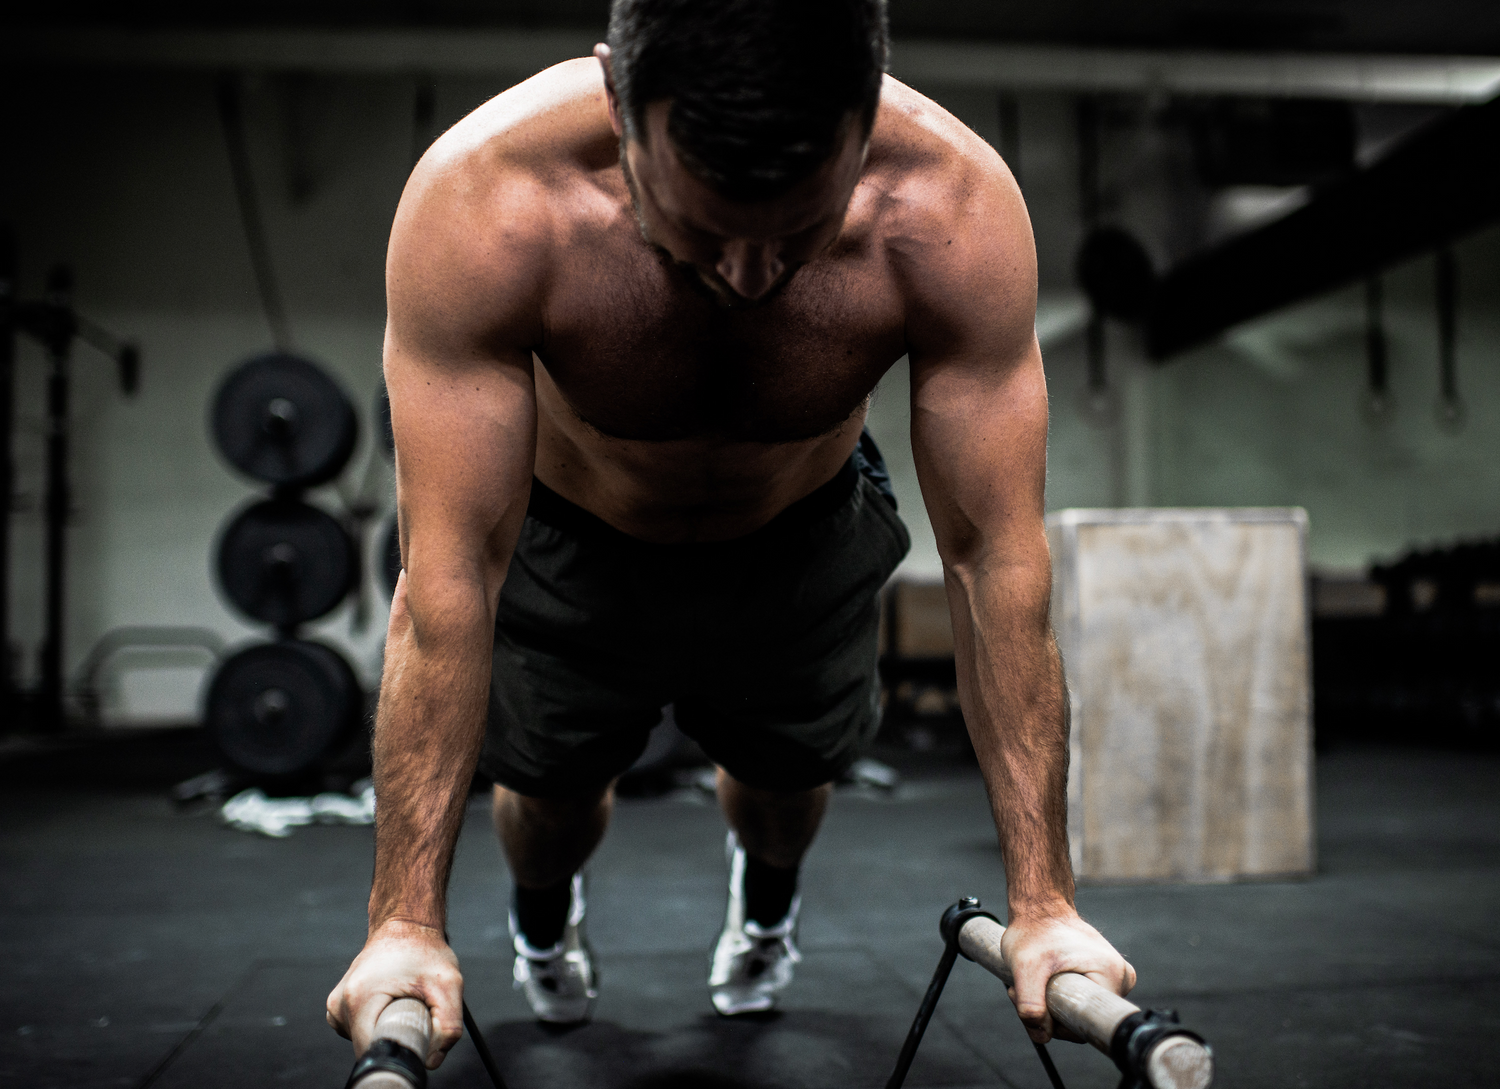 Athlete or crossfitter doing push-ups on a bar with wrapped hands and chalked up for a workout